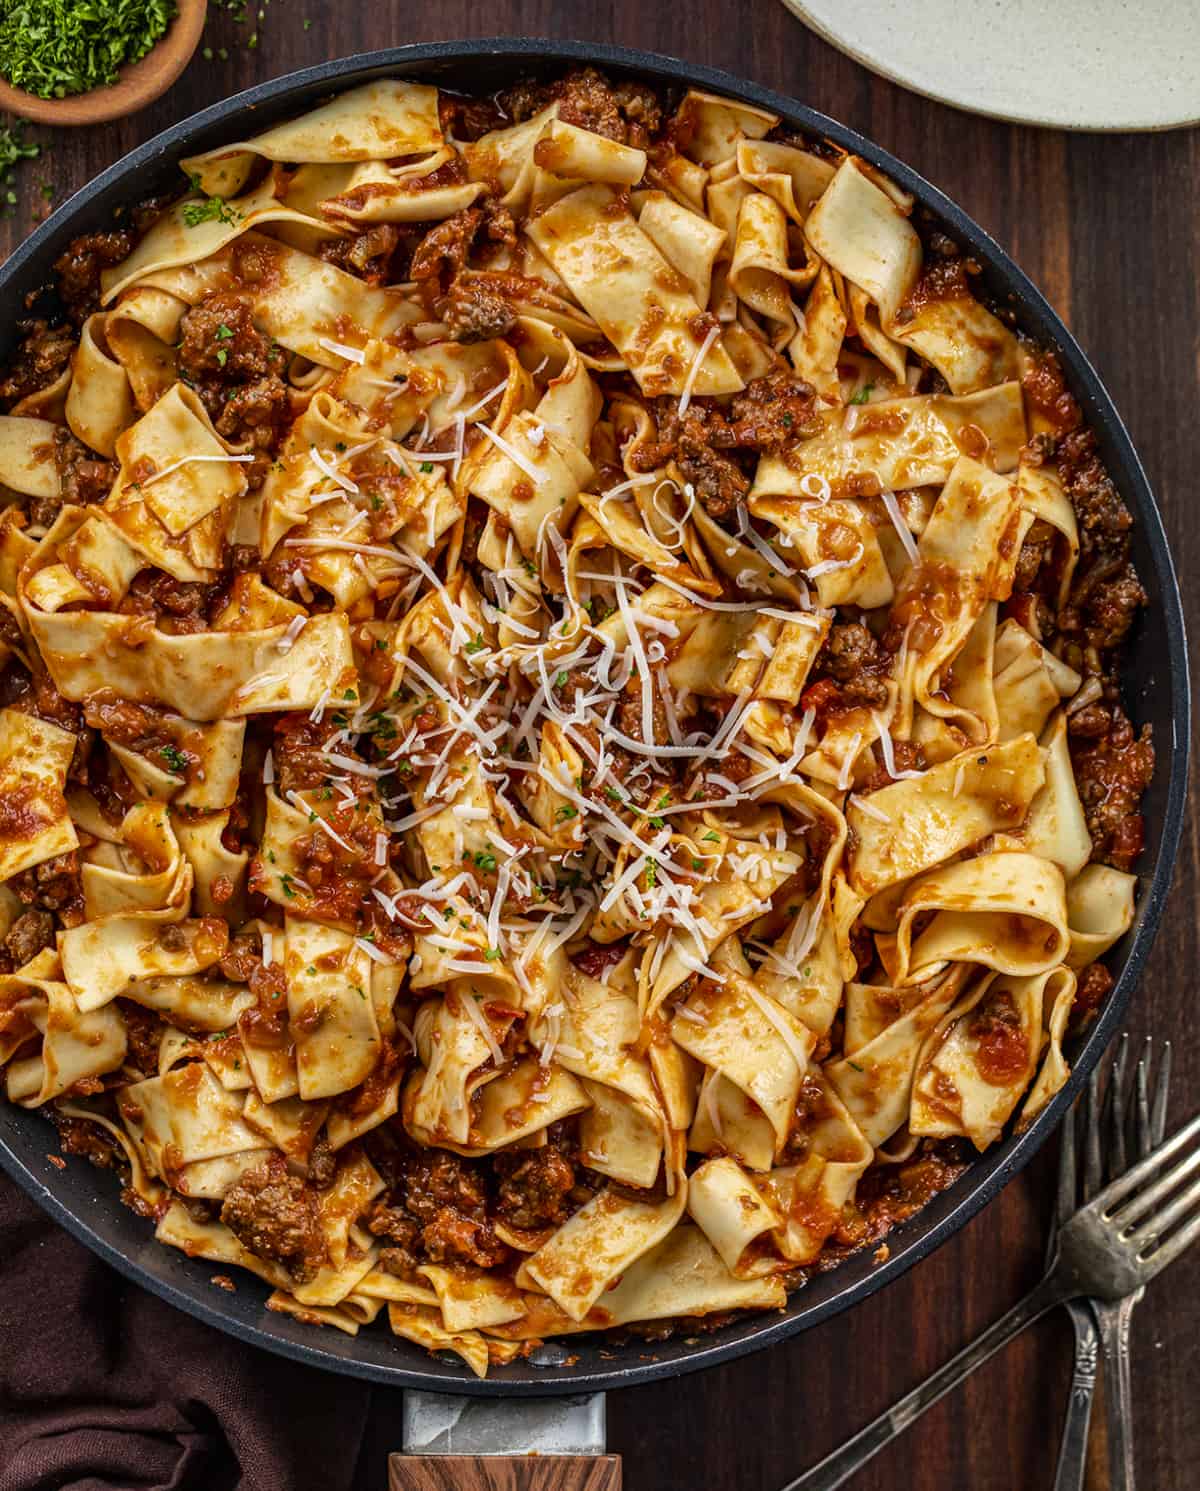 Pan of Bolognese Recipe with Noodles. Dinner, Supper, Dinner Idea, Italian Recipes, How to Make Bolognese, i am homesteader, iamhomesteader